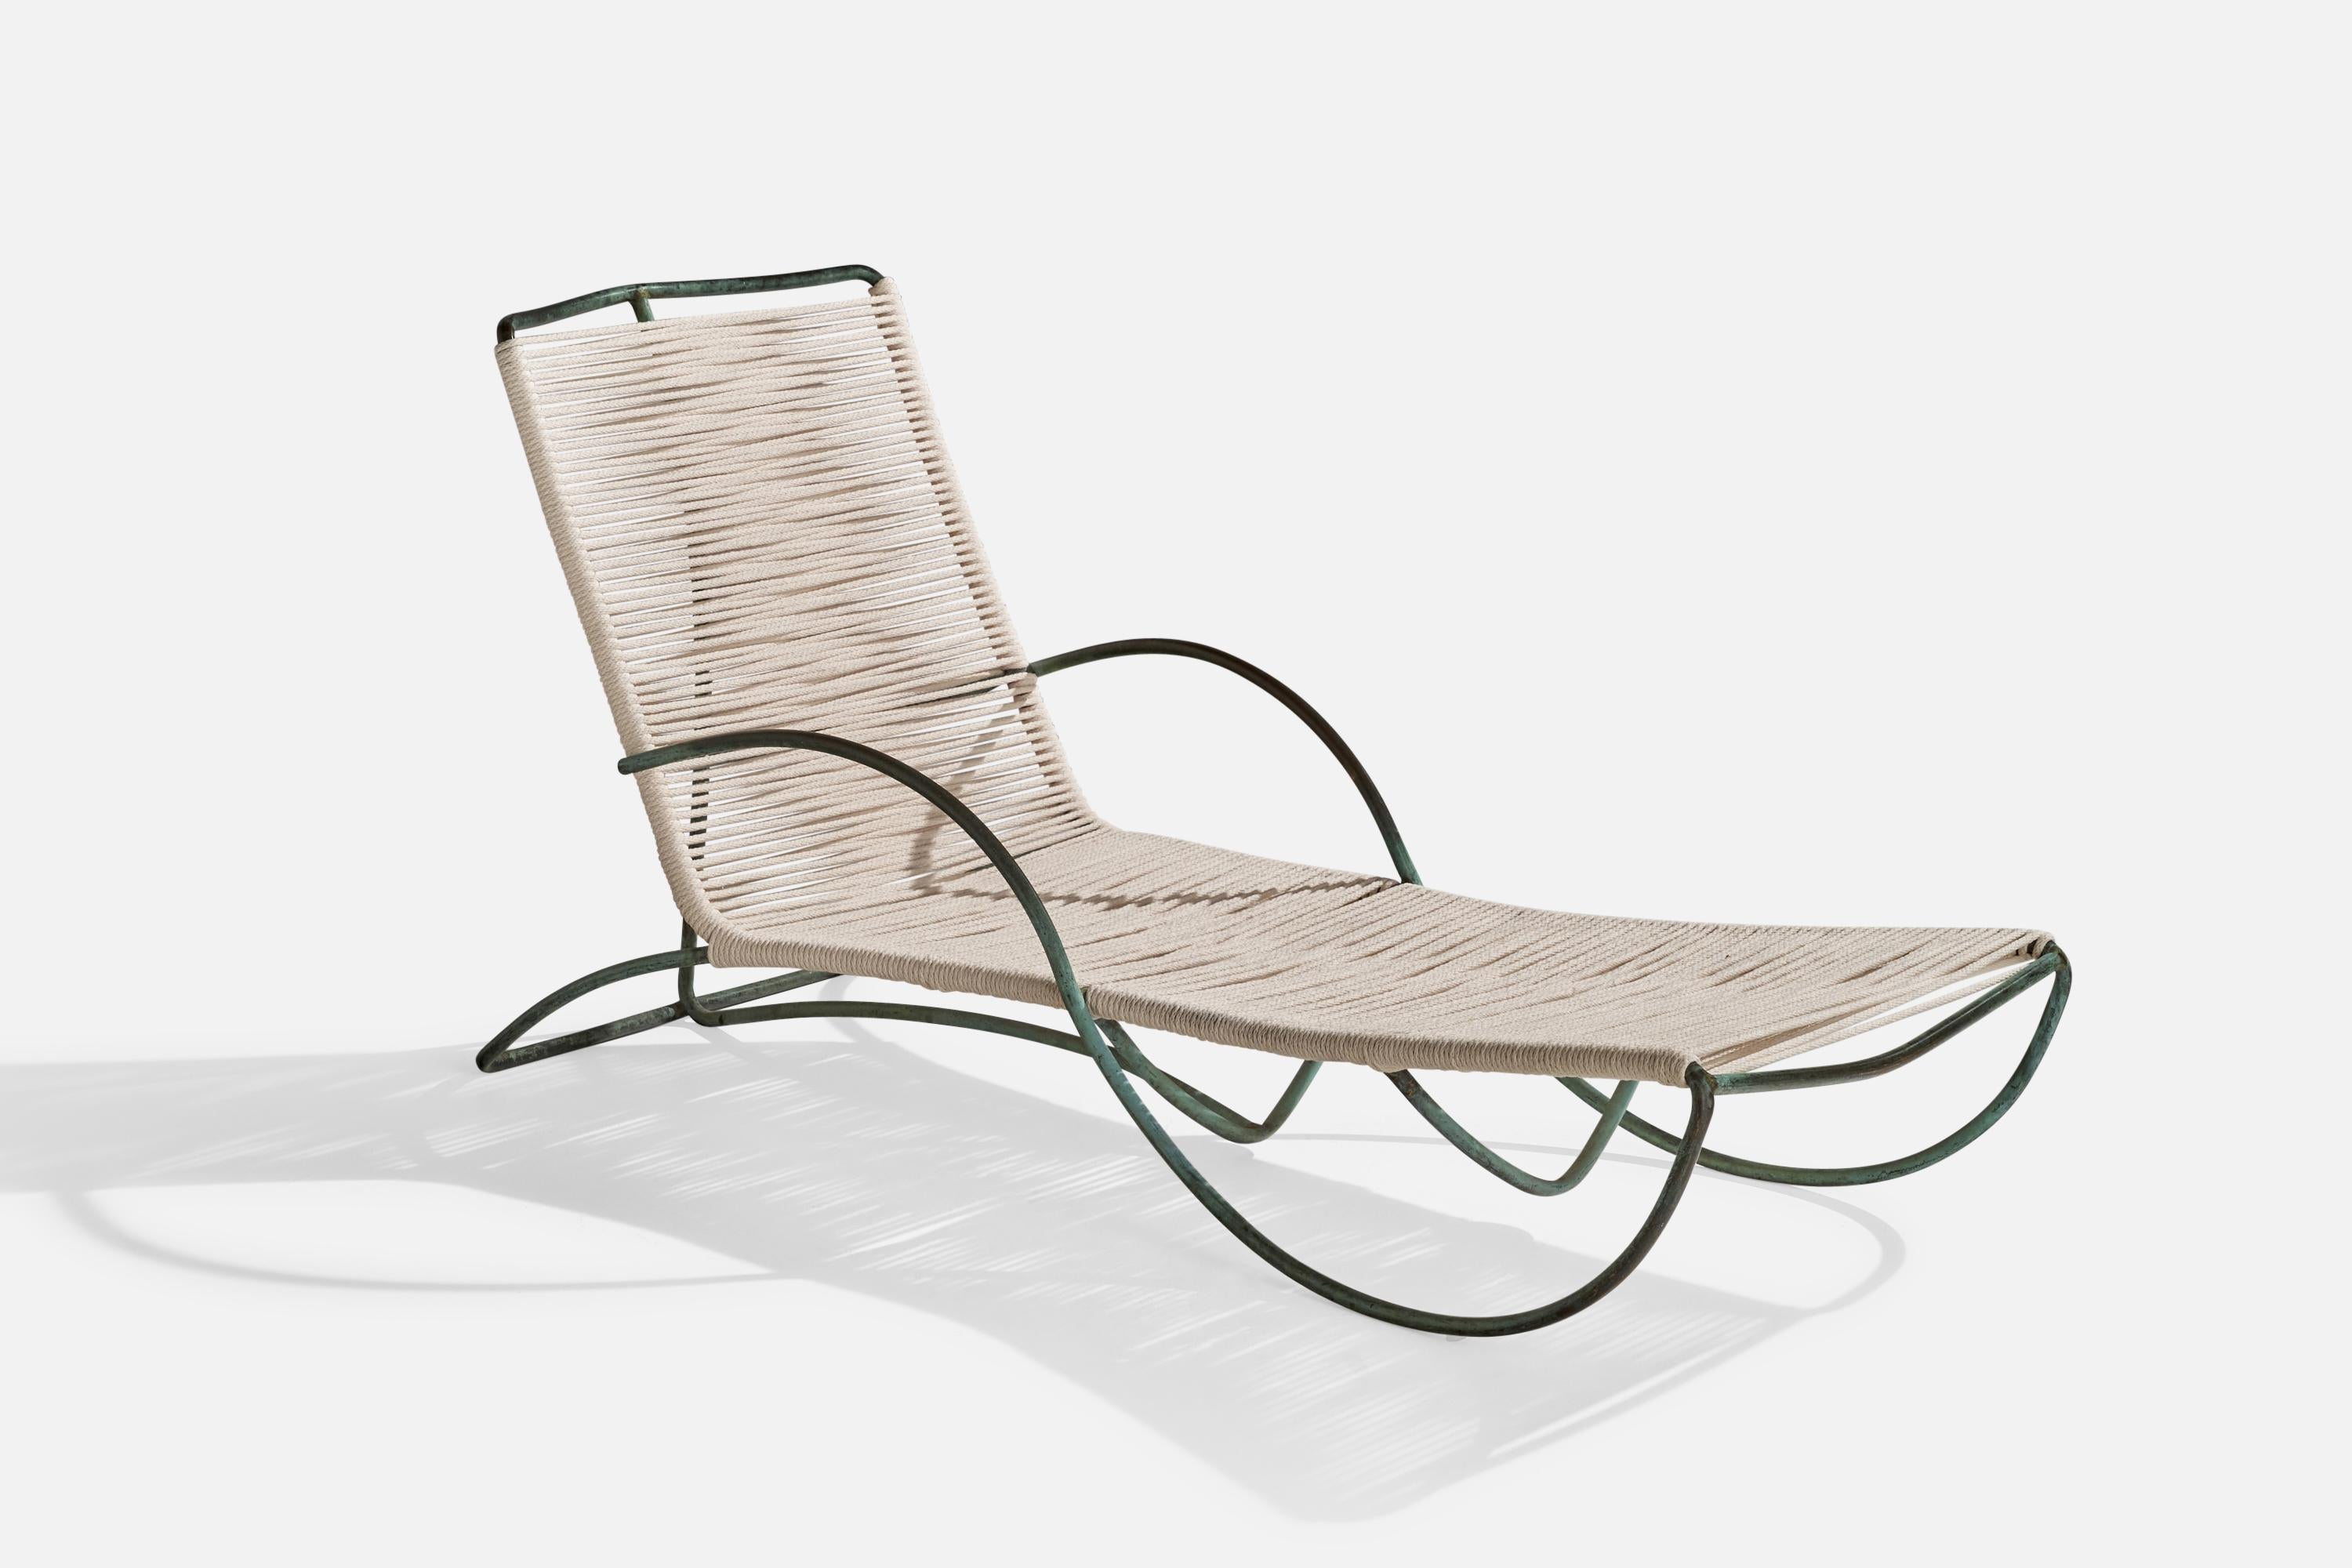 A bronze and fabric cord chaise longue designed by Walter Lamb and produced by Brown Jordan, USA, c. 1955.

